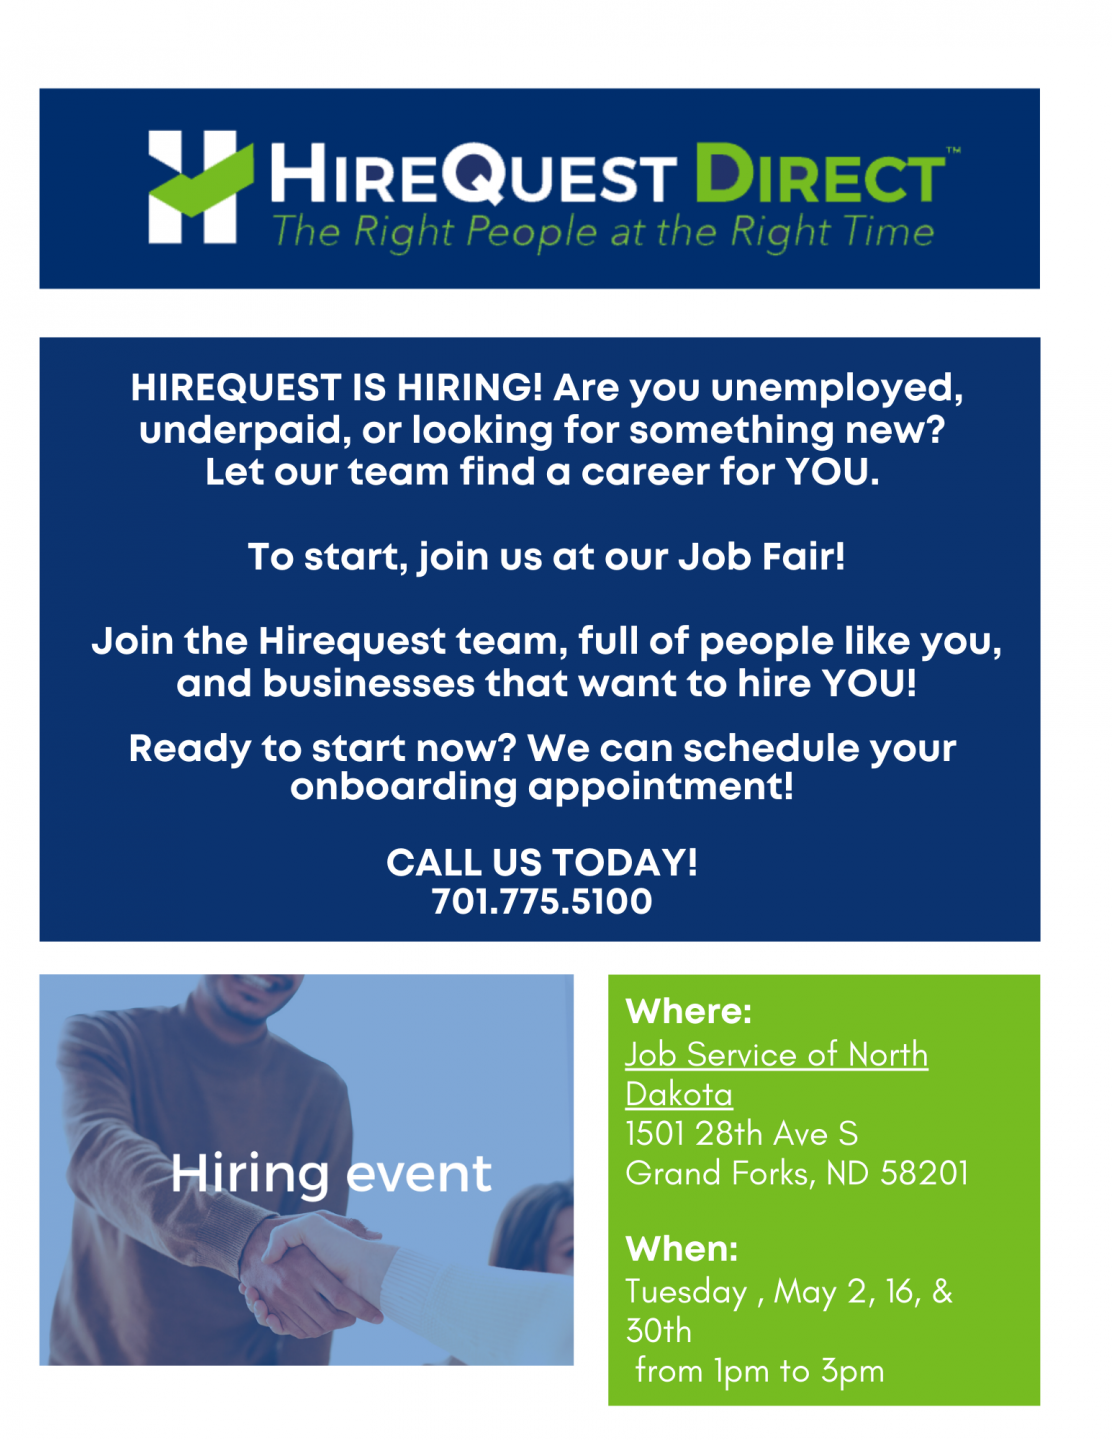 HireQuest Direct is Hiring! Are you unemployed, underpaid or looking for something new? Let our team find a career for YOU. To start, join us at our Tuesday Hiring Events at the Grand Forks Workforce Center. Tuesday, May 2nd, 16th and 30th from 1 pm to 3 pm https://www.jobsnd.com/.../express-employment... www.jobsnd.com #NDJobs #JOBSND #jobupnd #NDisHiring #NDWorkforce